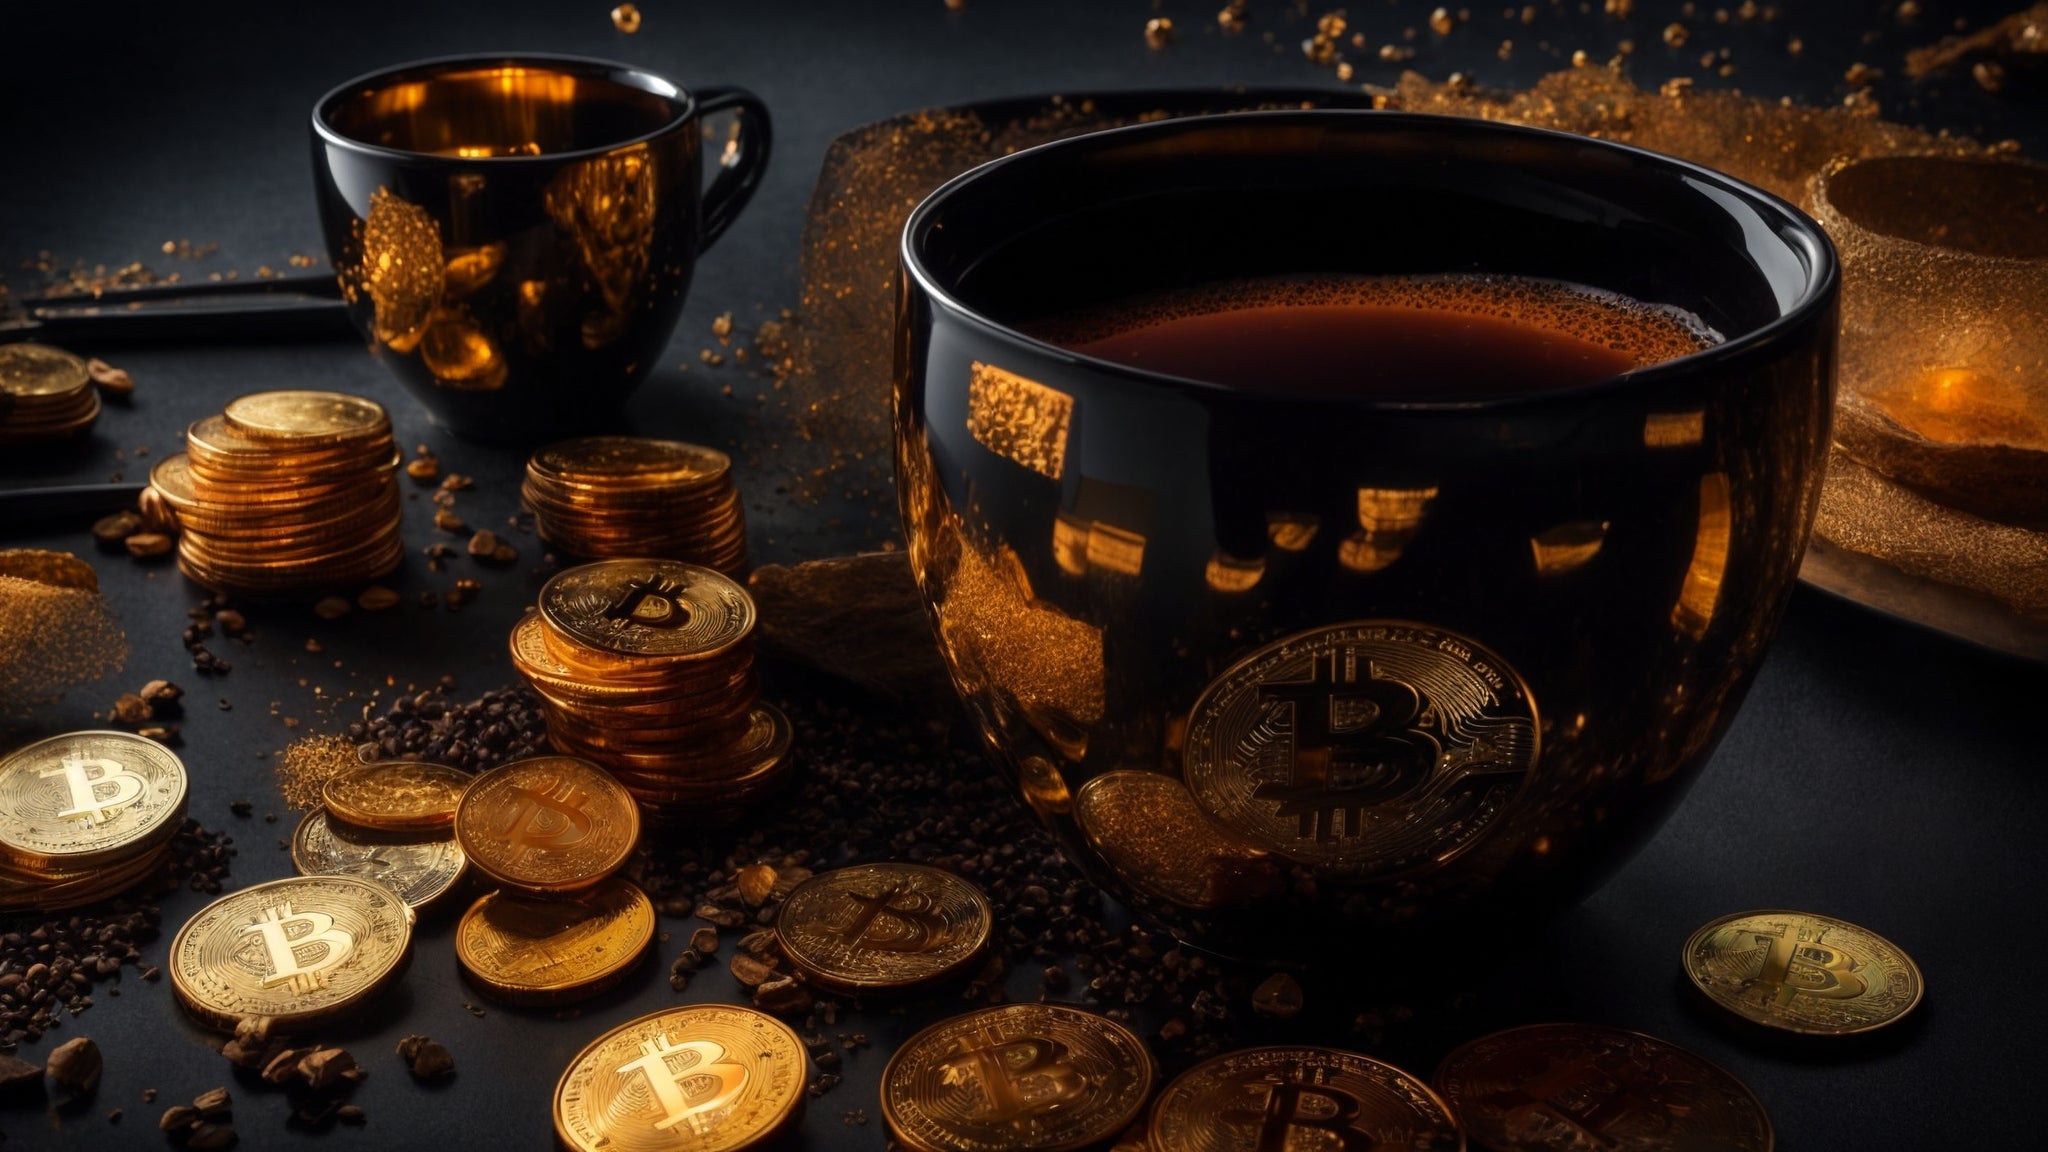 HODL | Bitcoin Black Mugs: The Perfect Gift for Crypto Enthusiasts